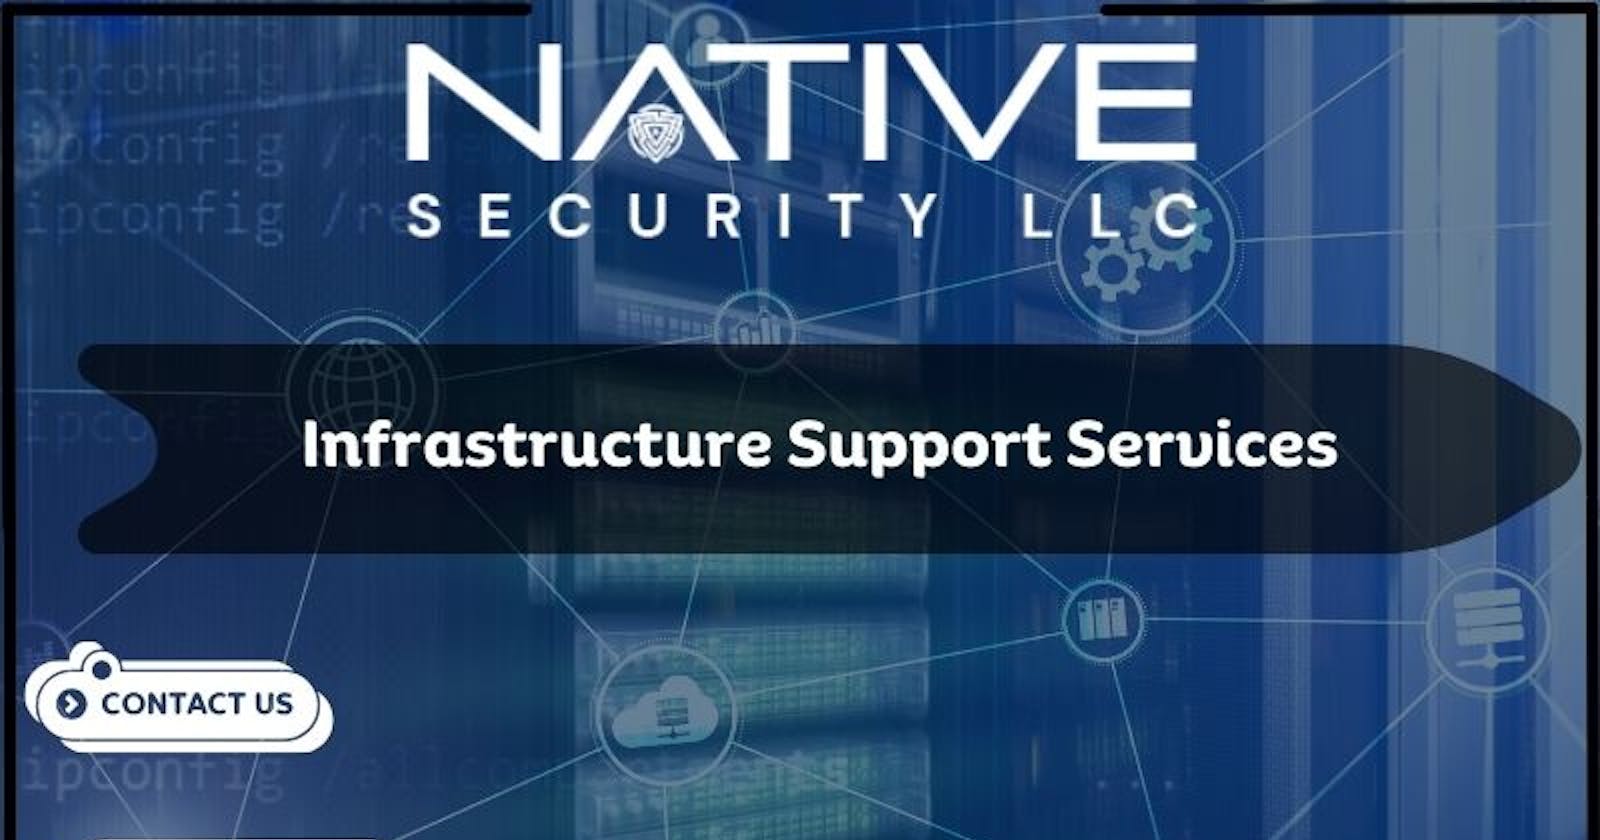 Infrastructure Support Services for Tribal Nations